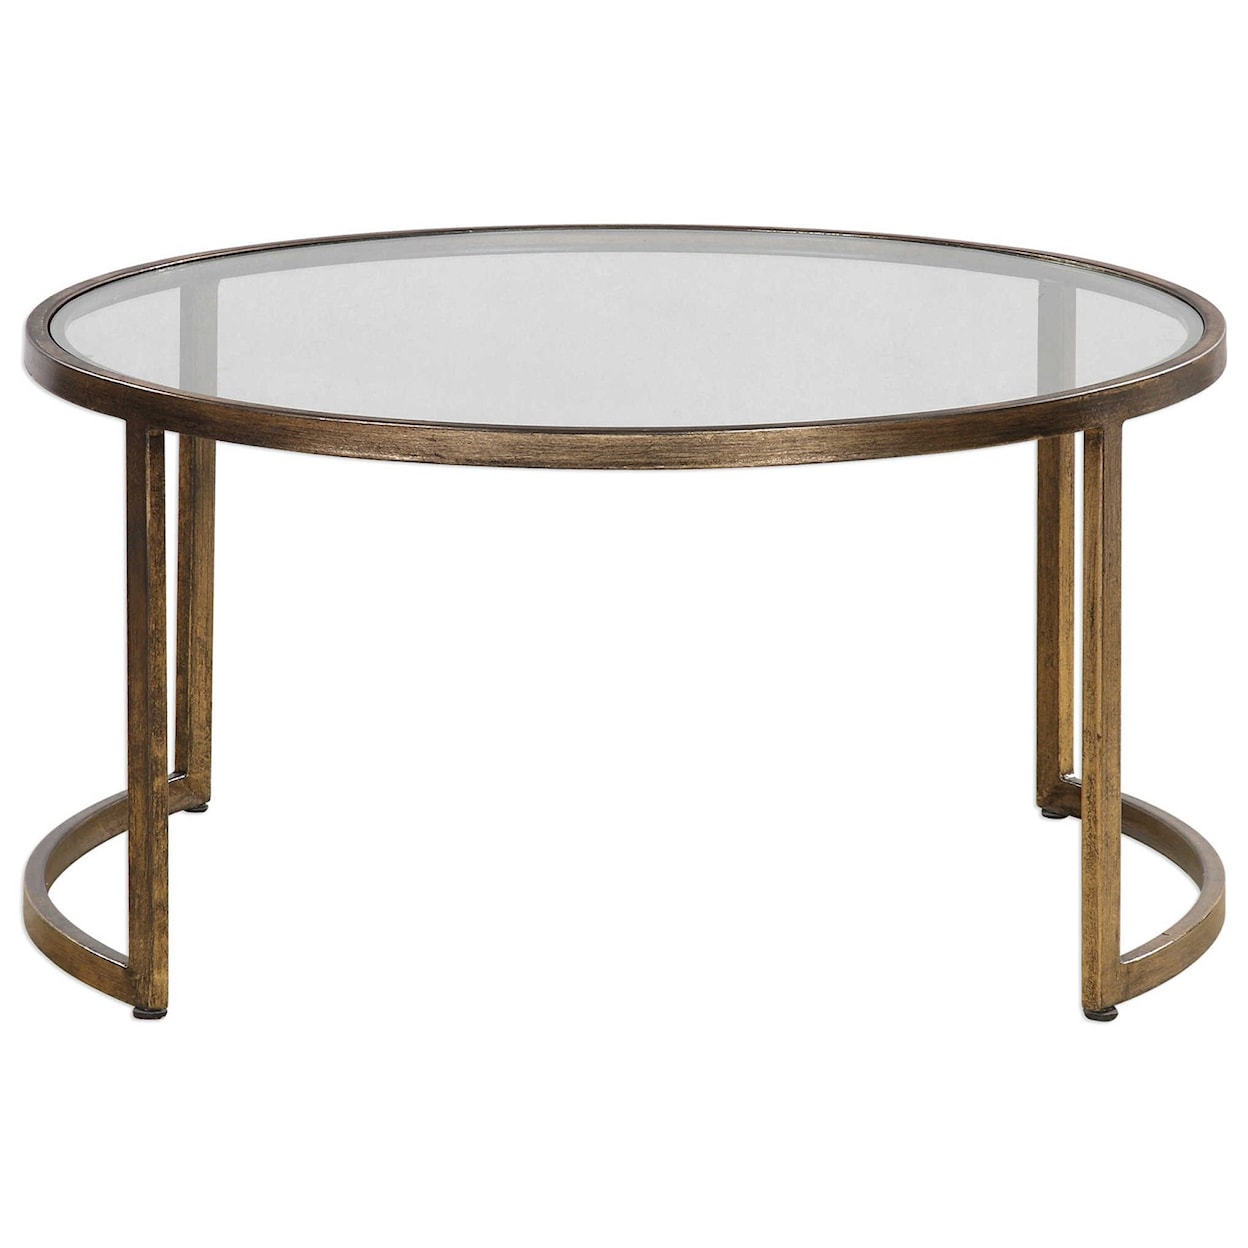 Uttermost Accent Furniture - Occasional Tables Rhea Nested Coffee Tables Set of 2